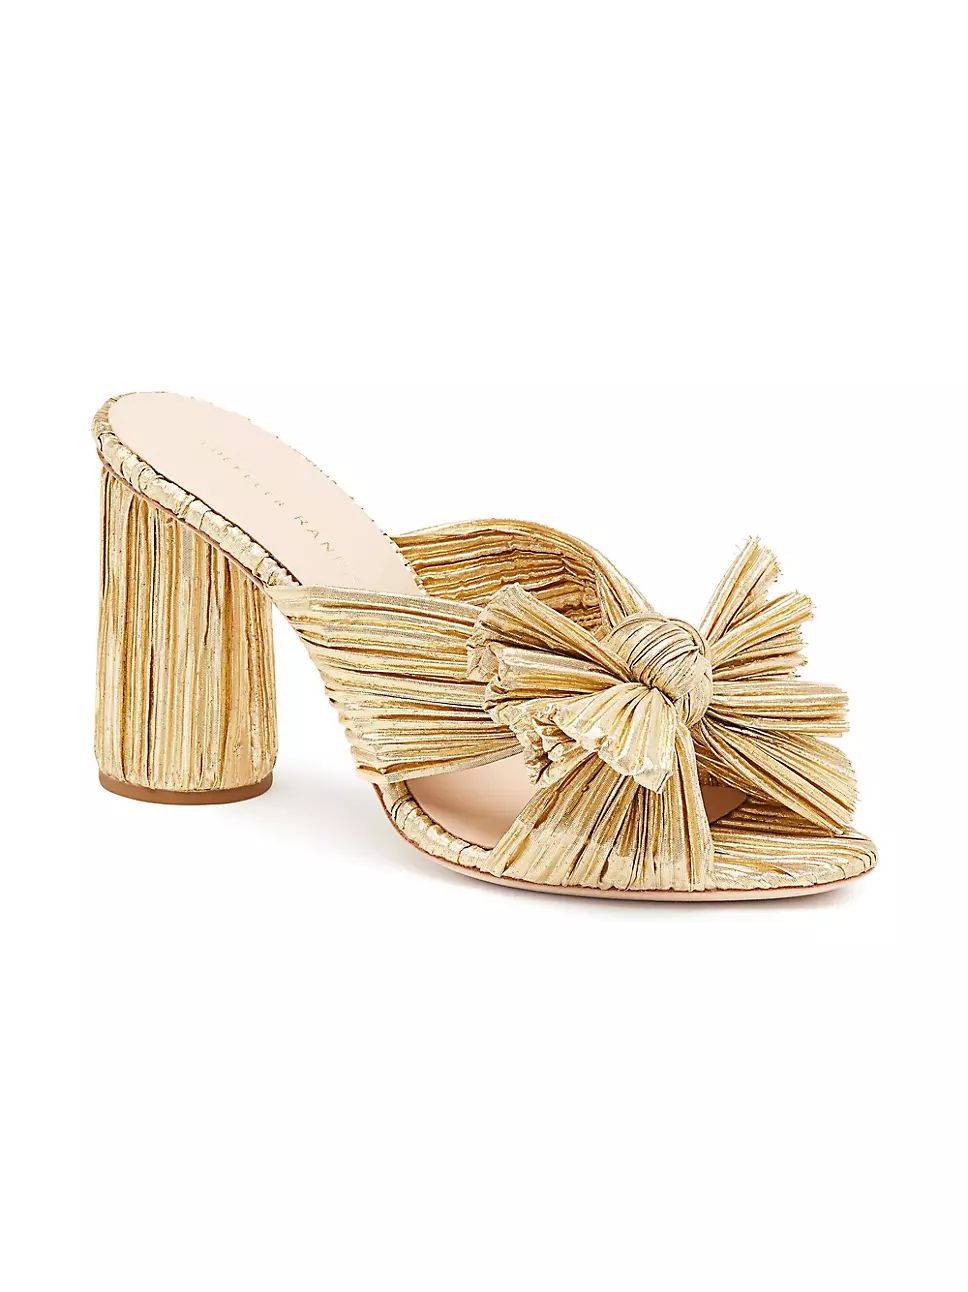 Penny Knotted Metallic Mules | Saks Fifth Avenue